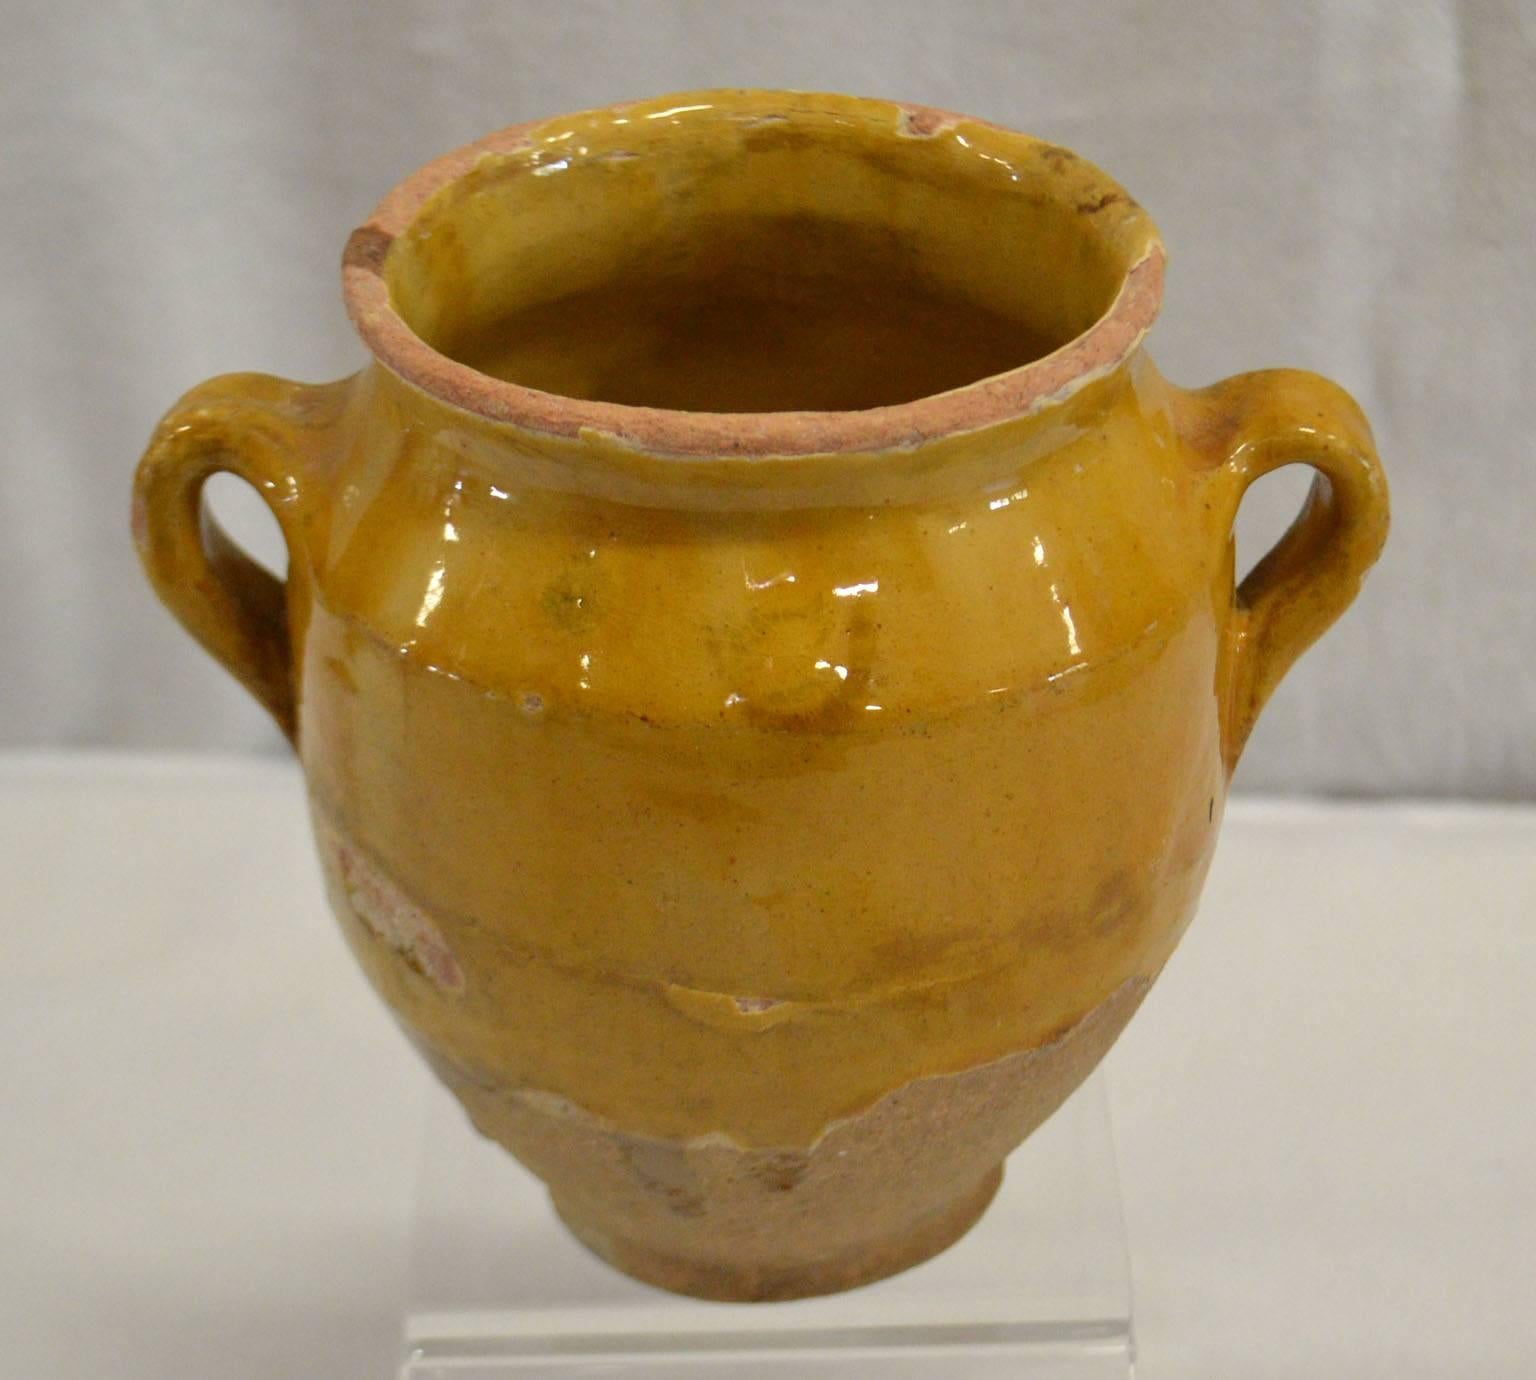 Small (rare) terra cotta pot with a gold glaze.Once a common piece of pottery used daily in French kitchens, these earthenware jugs have become showcase pieces sought by designers and collectors. These beautiful vessels offer a depth of color and a